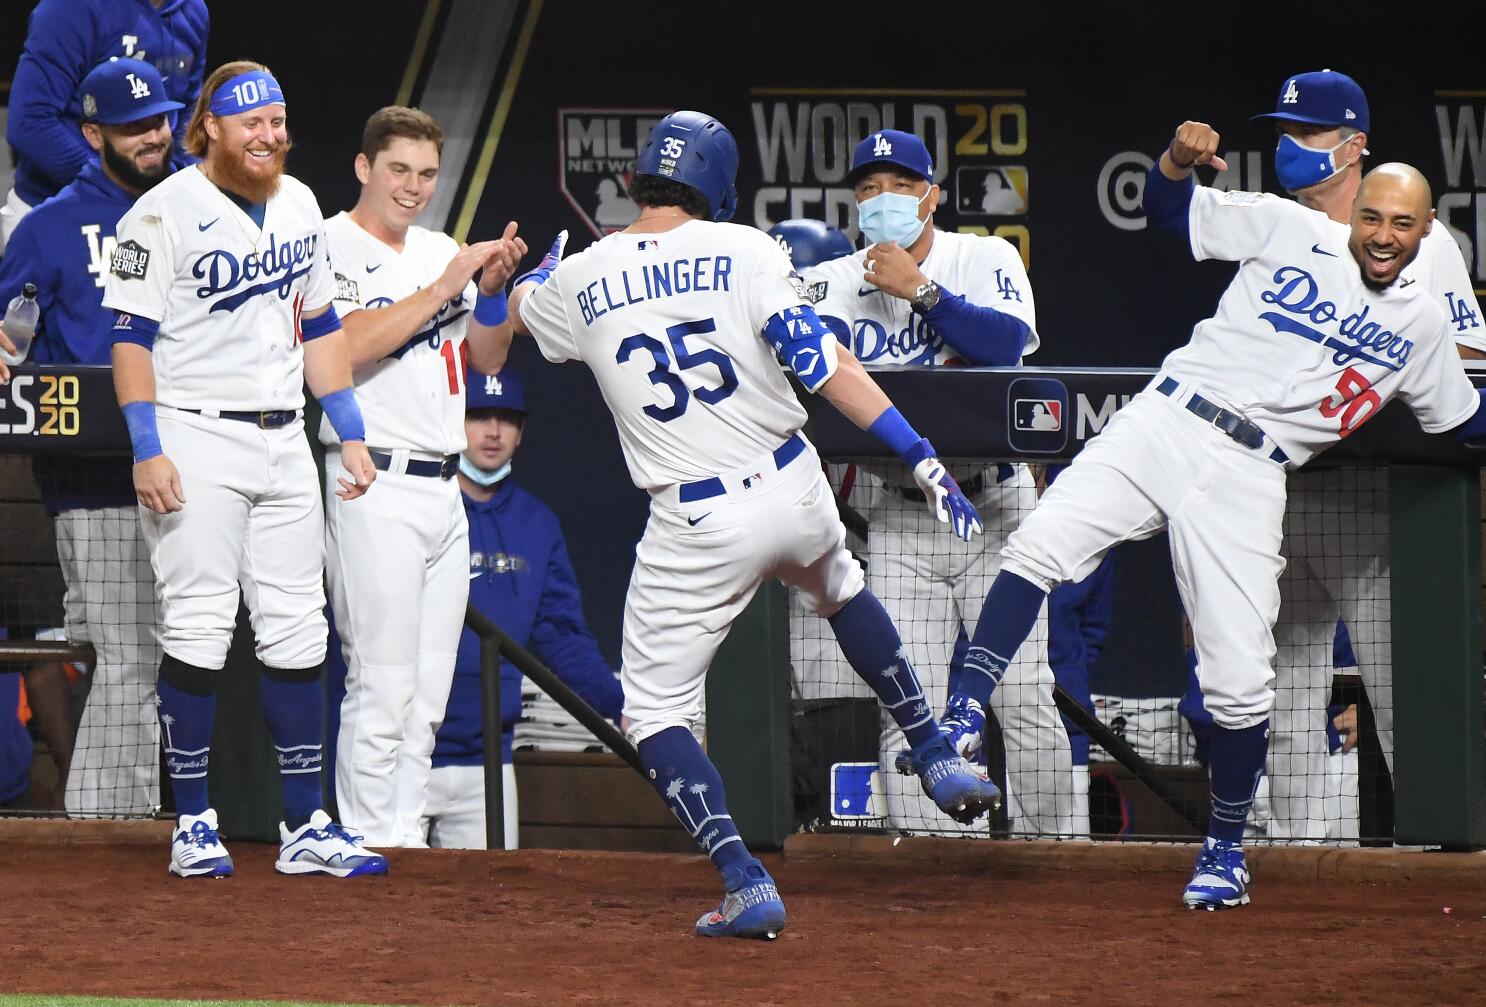 The Rays and Dodgers Are No. 1 Seeds—but This World Series Matchup